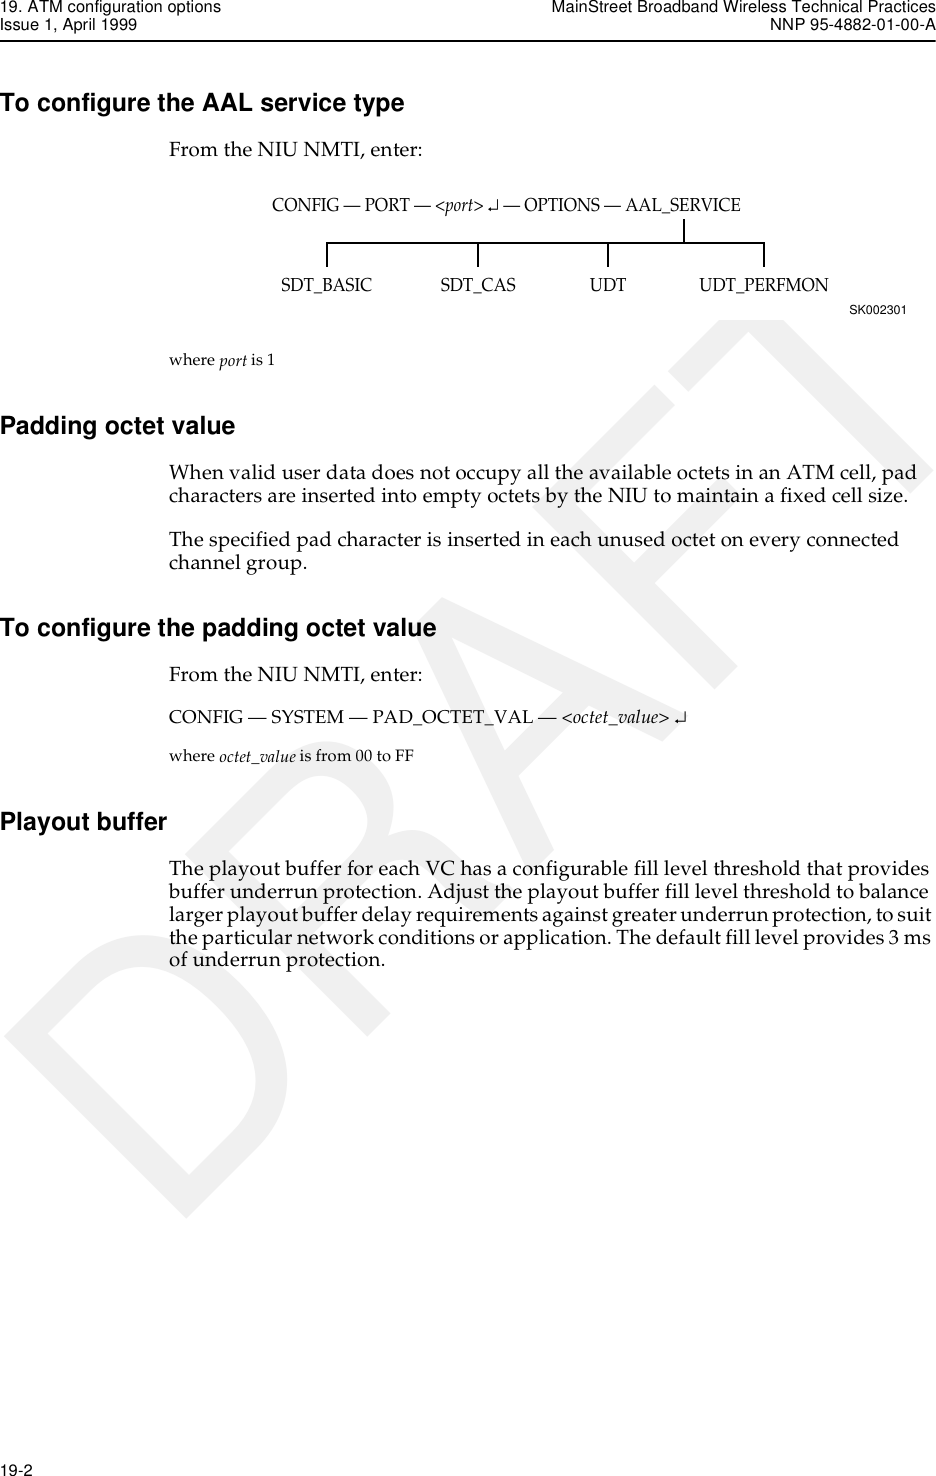 19. ATM configuration options MainStreet Broadband Wireless Technical PracticesIssue 1, April 1999 NNP 95-4882-01-00-A19-2   DRAFTTo configure the AAL service typeFrom the NIU NMTI, enter:where port is 1Padding octet valueWhen valid user data does not occupy all the available octets in an ATM cell, pad characters are inserted into empty octets by the NIU to maintain a fixed cell size.The specified pad character is inserted in each unused octet on every connected channel group. To configure the padding octet valueFrom the NIU NMTI, enter:CONFIG — SYSTEM — PAD_OCTET_VAL — &lt;octet_value&gt; ↵where octet_value is from 00 to FFPlayout bufferThe playout buffer for each VC has a configurable fill level threshold that provides buffer underrun protection. Adjust the playout buffer fill level threshold to balance larger playout buffer delay requirements against greater underrun protection, to suit the particular network conditions or application. The default fill level provides 3 ms of underrun protection.CONFIG — PORT — &lt;port&gt; ↵ — OPTIONS — AAL_SERVICESK002301UDT_PERFMONSDT_BASIC UDTSDT_CAS